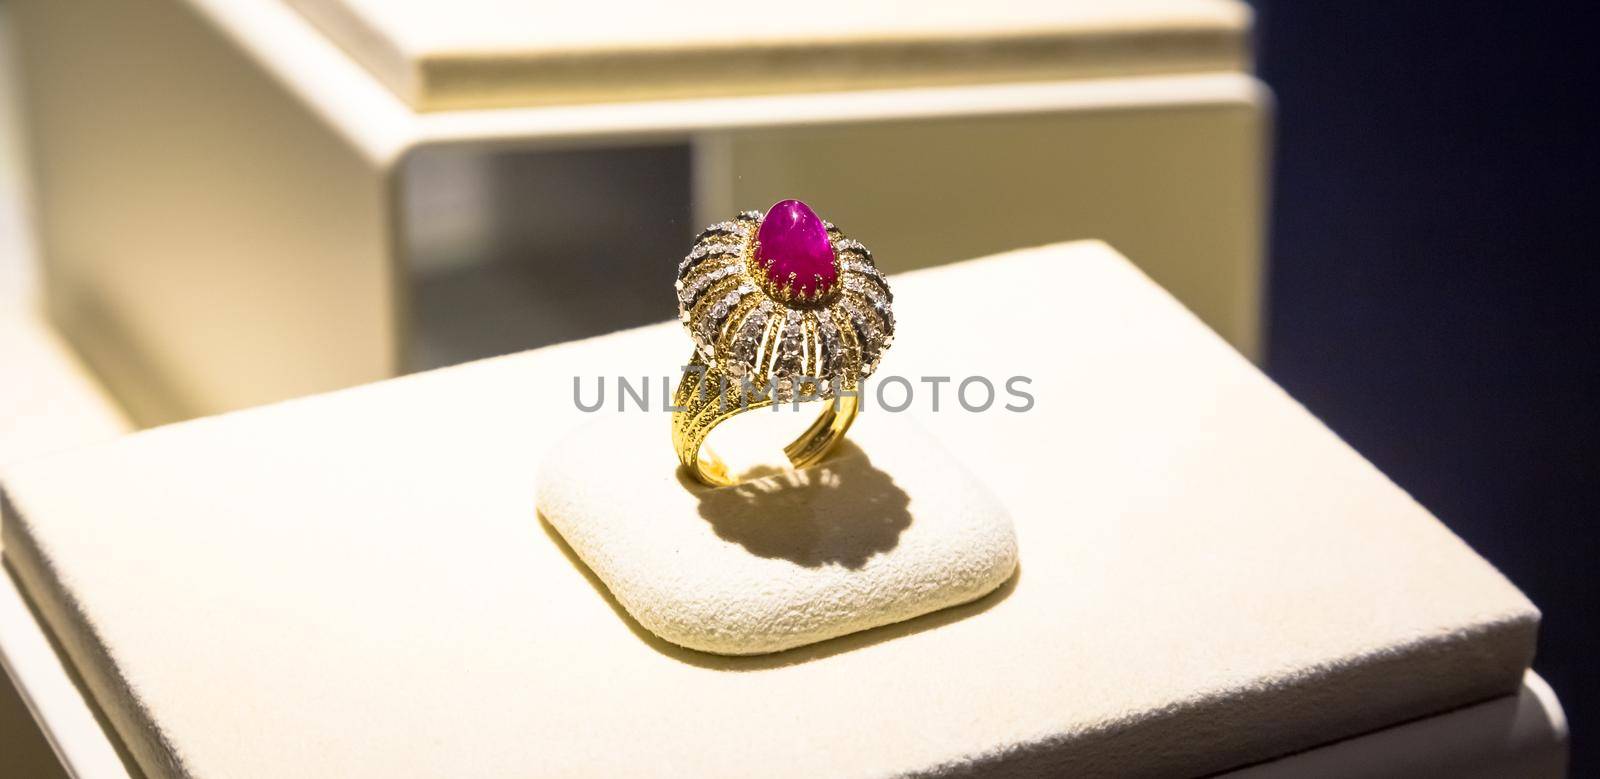 Luxury ring with giant ruby gem by Perseomedusa